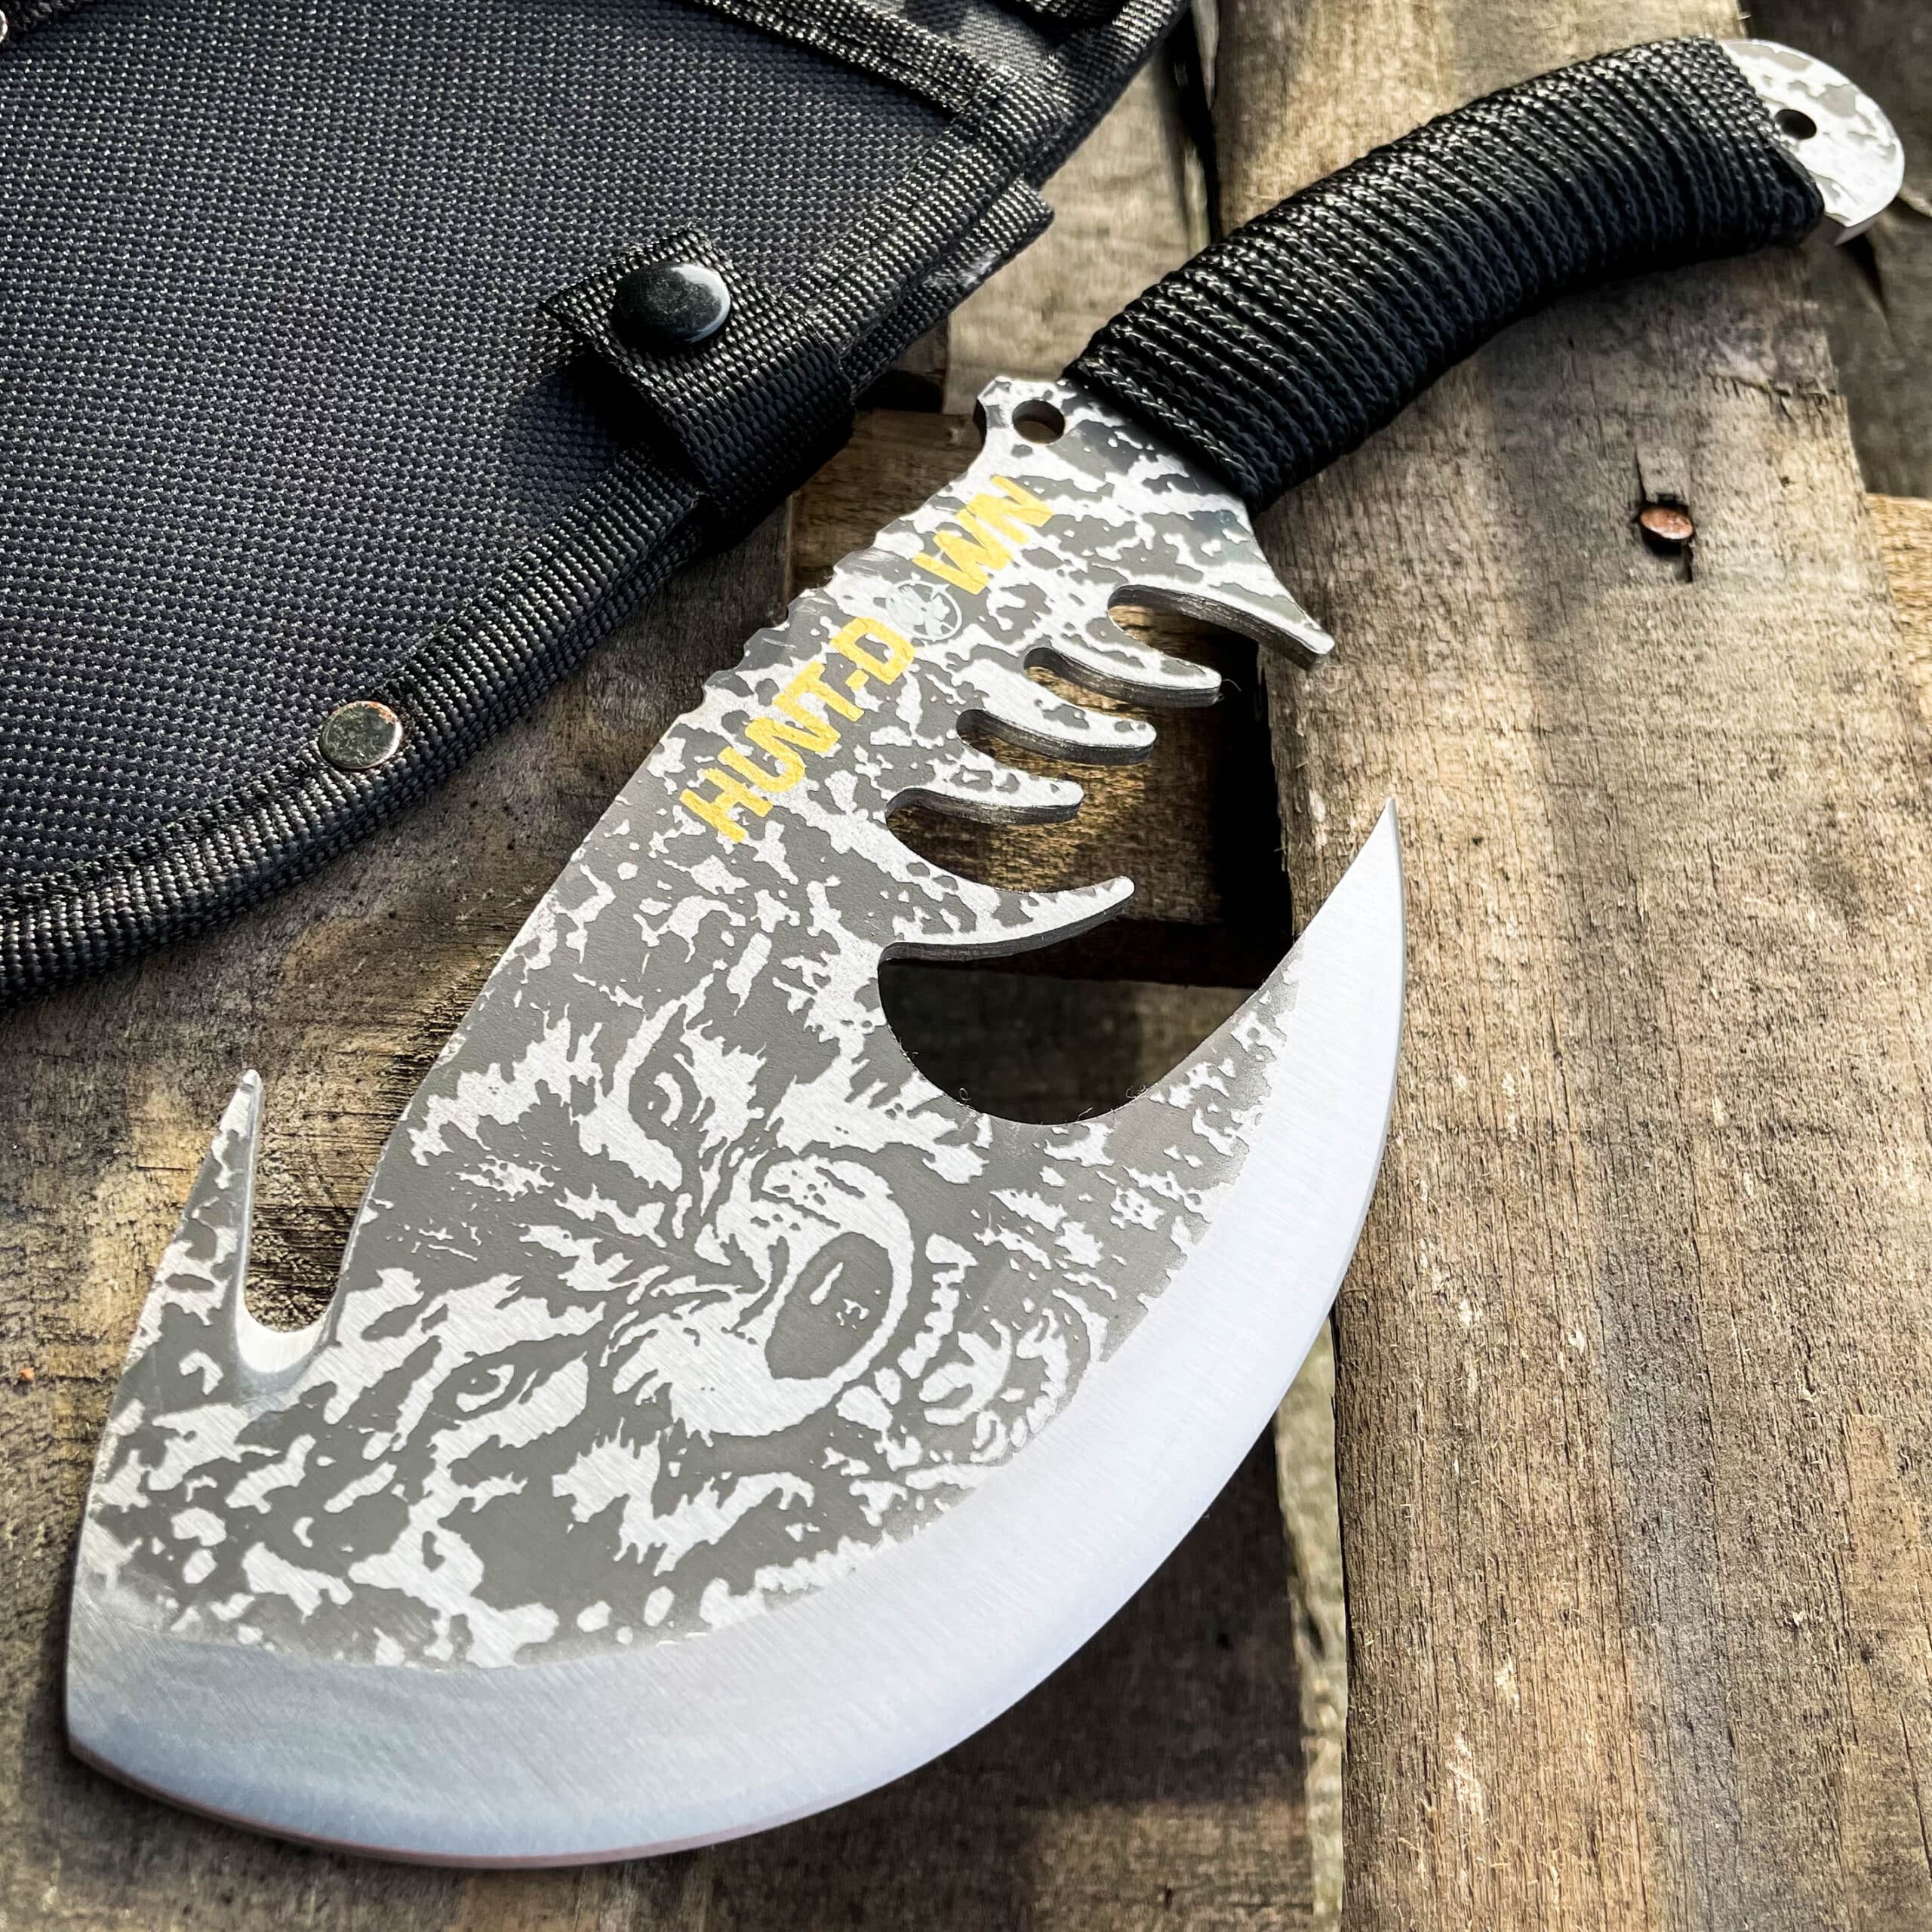 11.5" Outdoor Camping Survival Fixed Blade Tomahawk Wolf Etch Axe Hatchet Knife